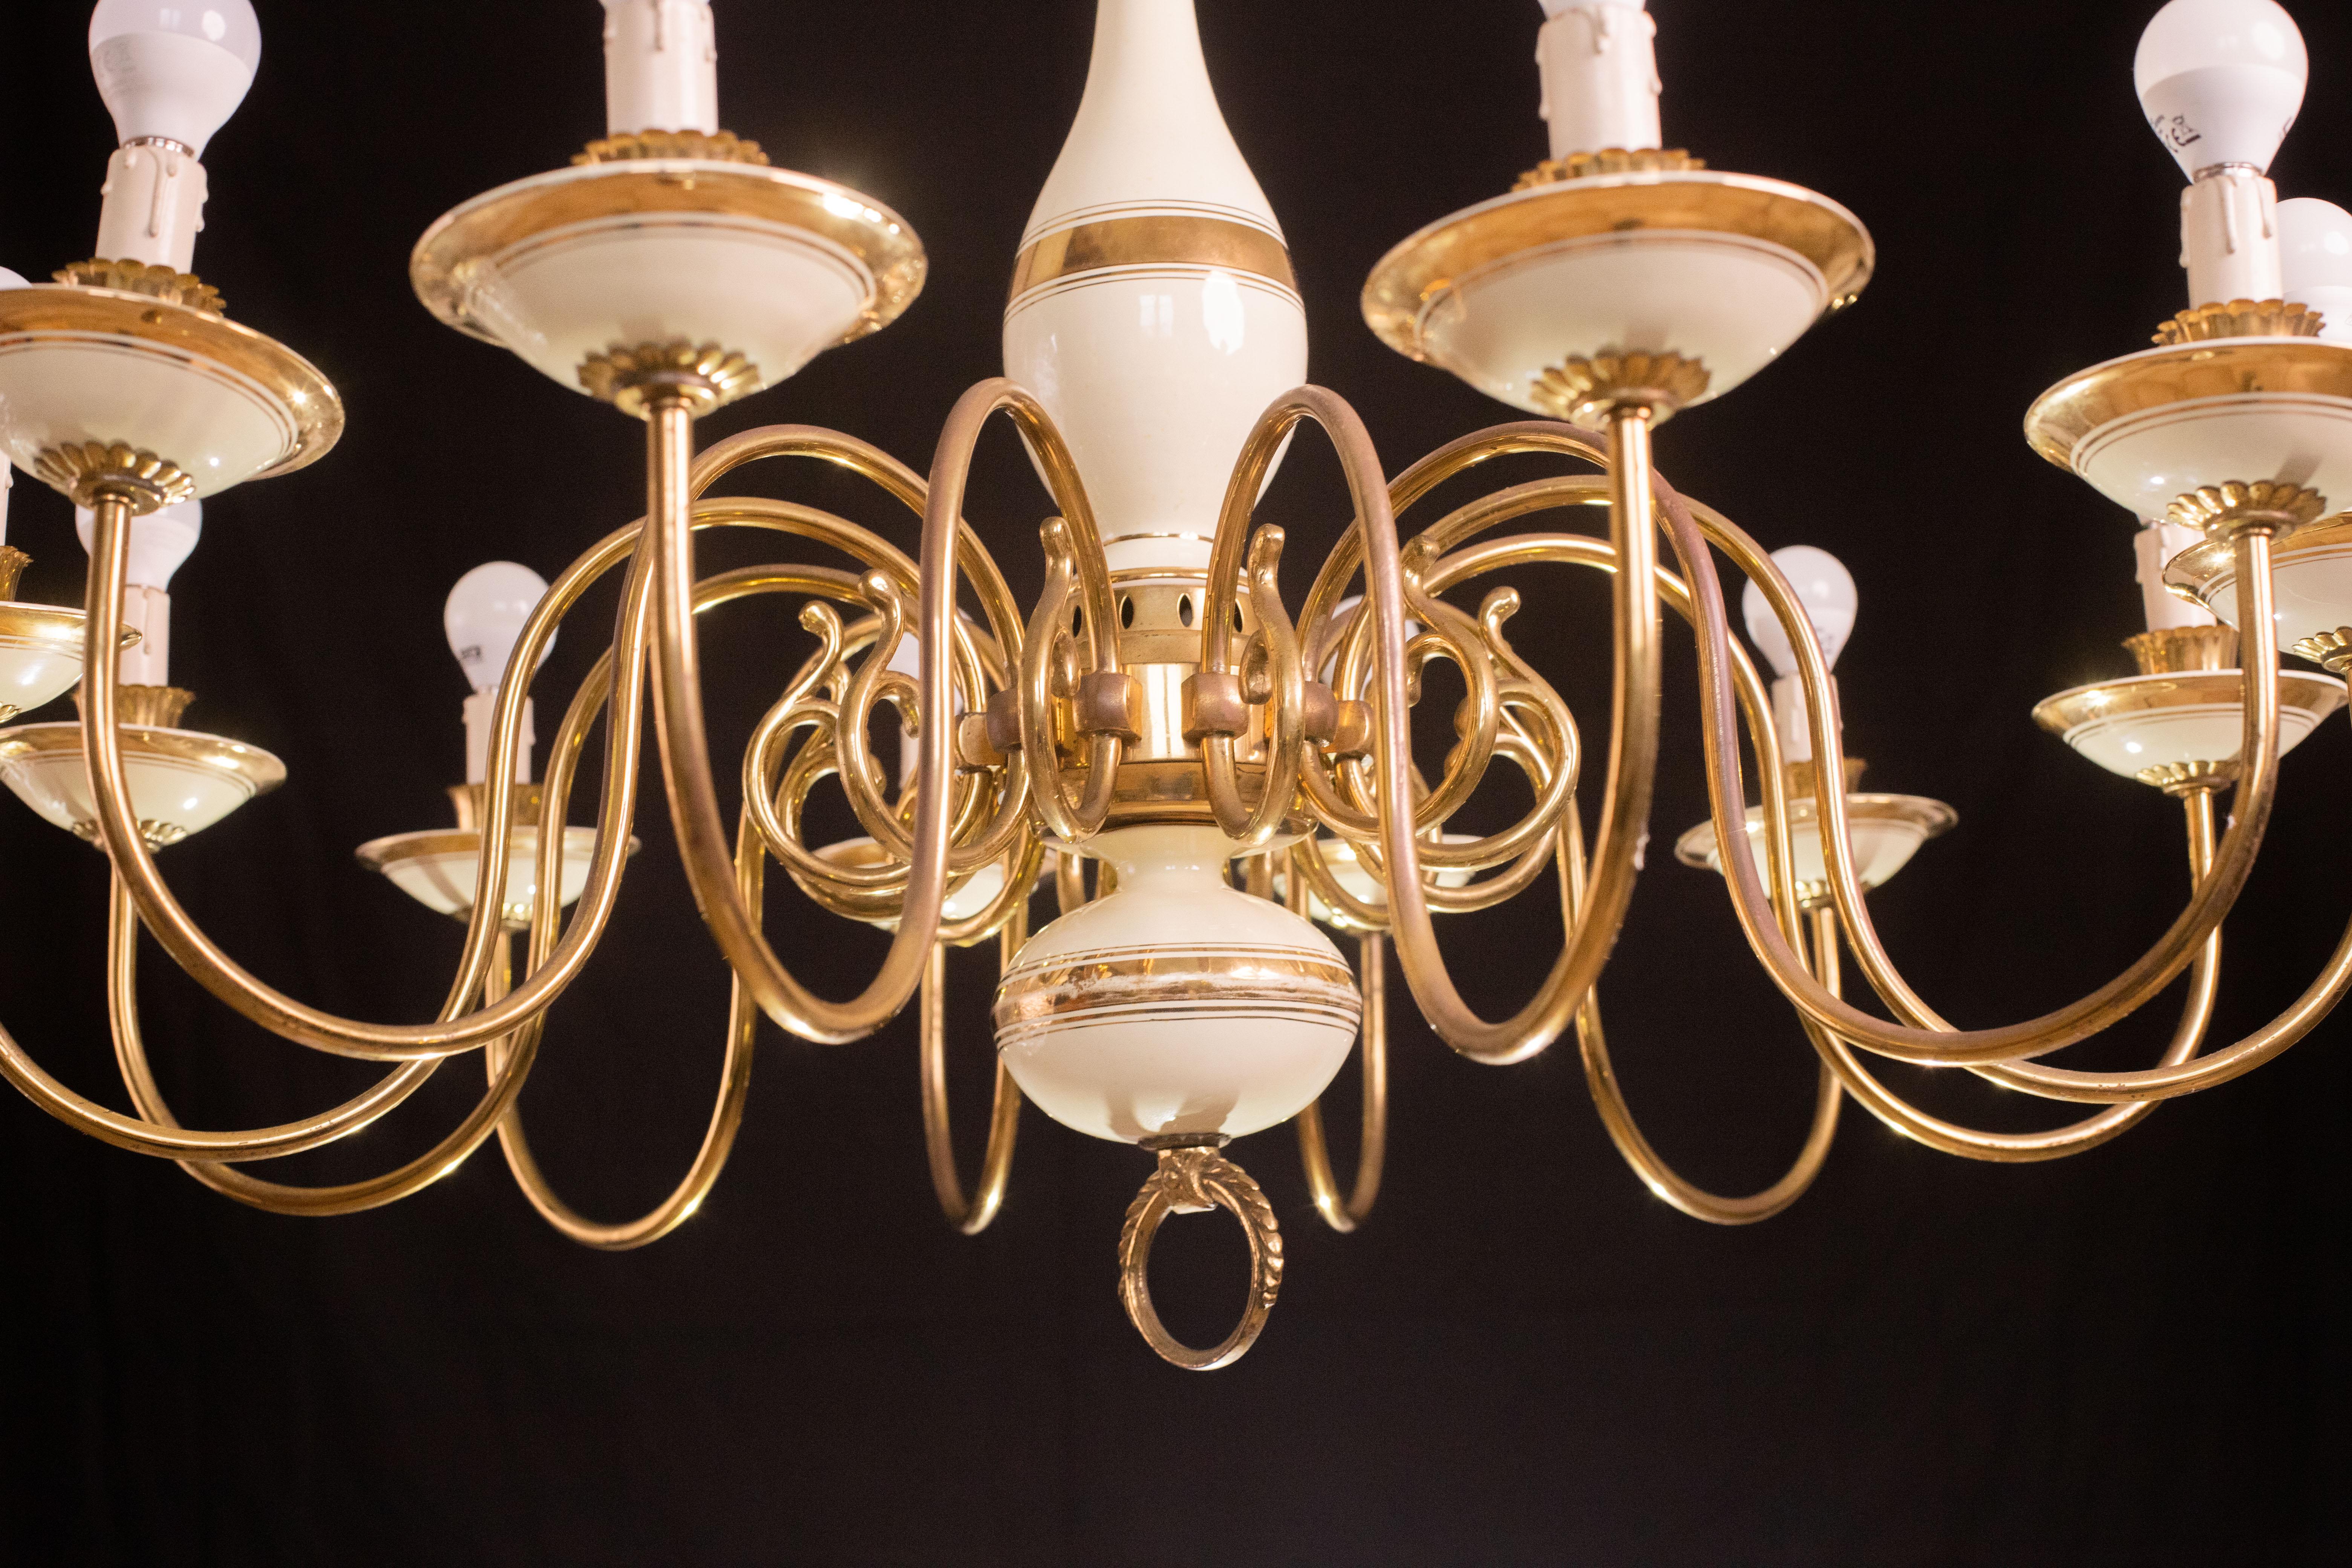 Monumental 12 Lights Art Deco Brass and Ceramic Chandelier, 1950s For Sale 7